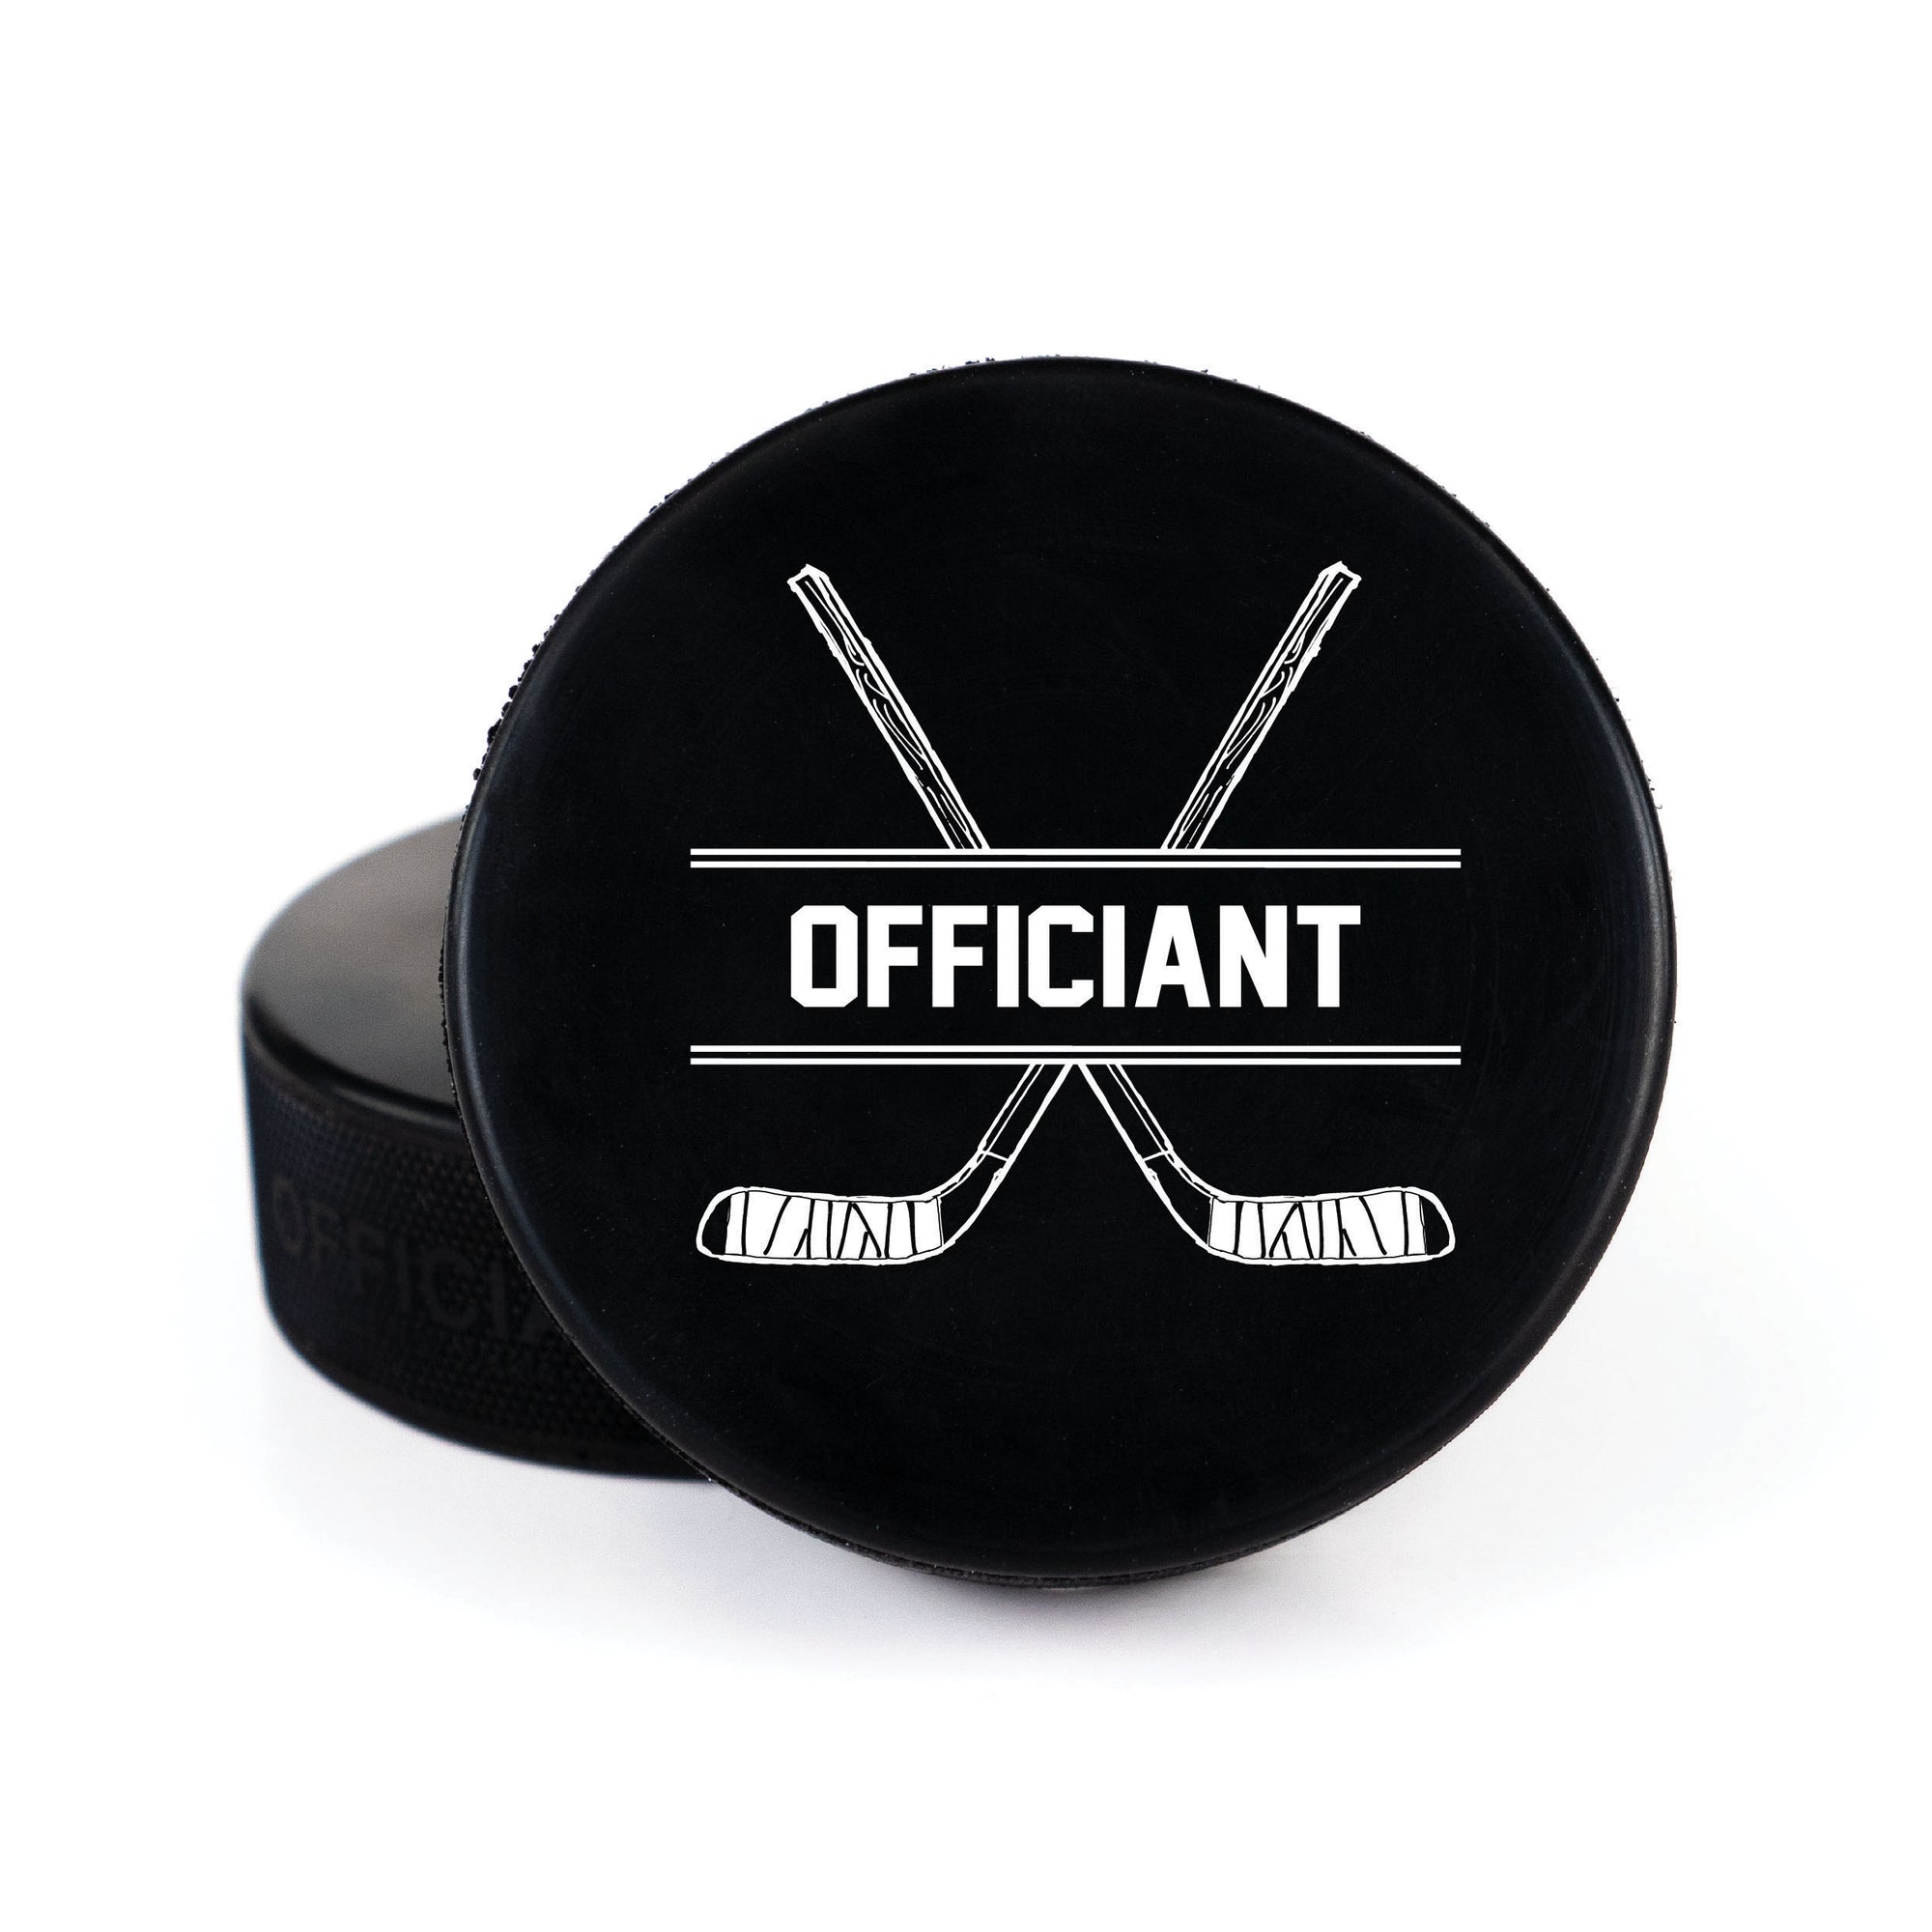 Printed Hockey Puck with Officiant Design